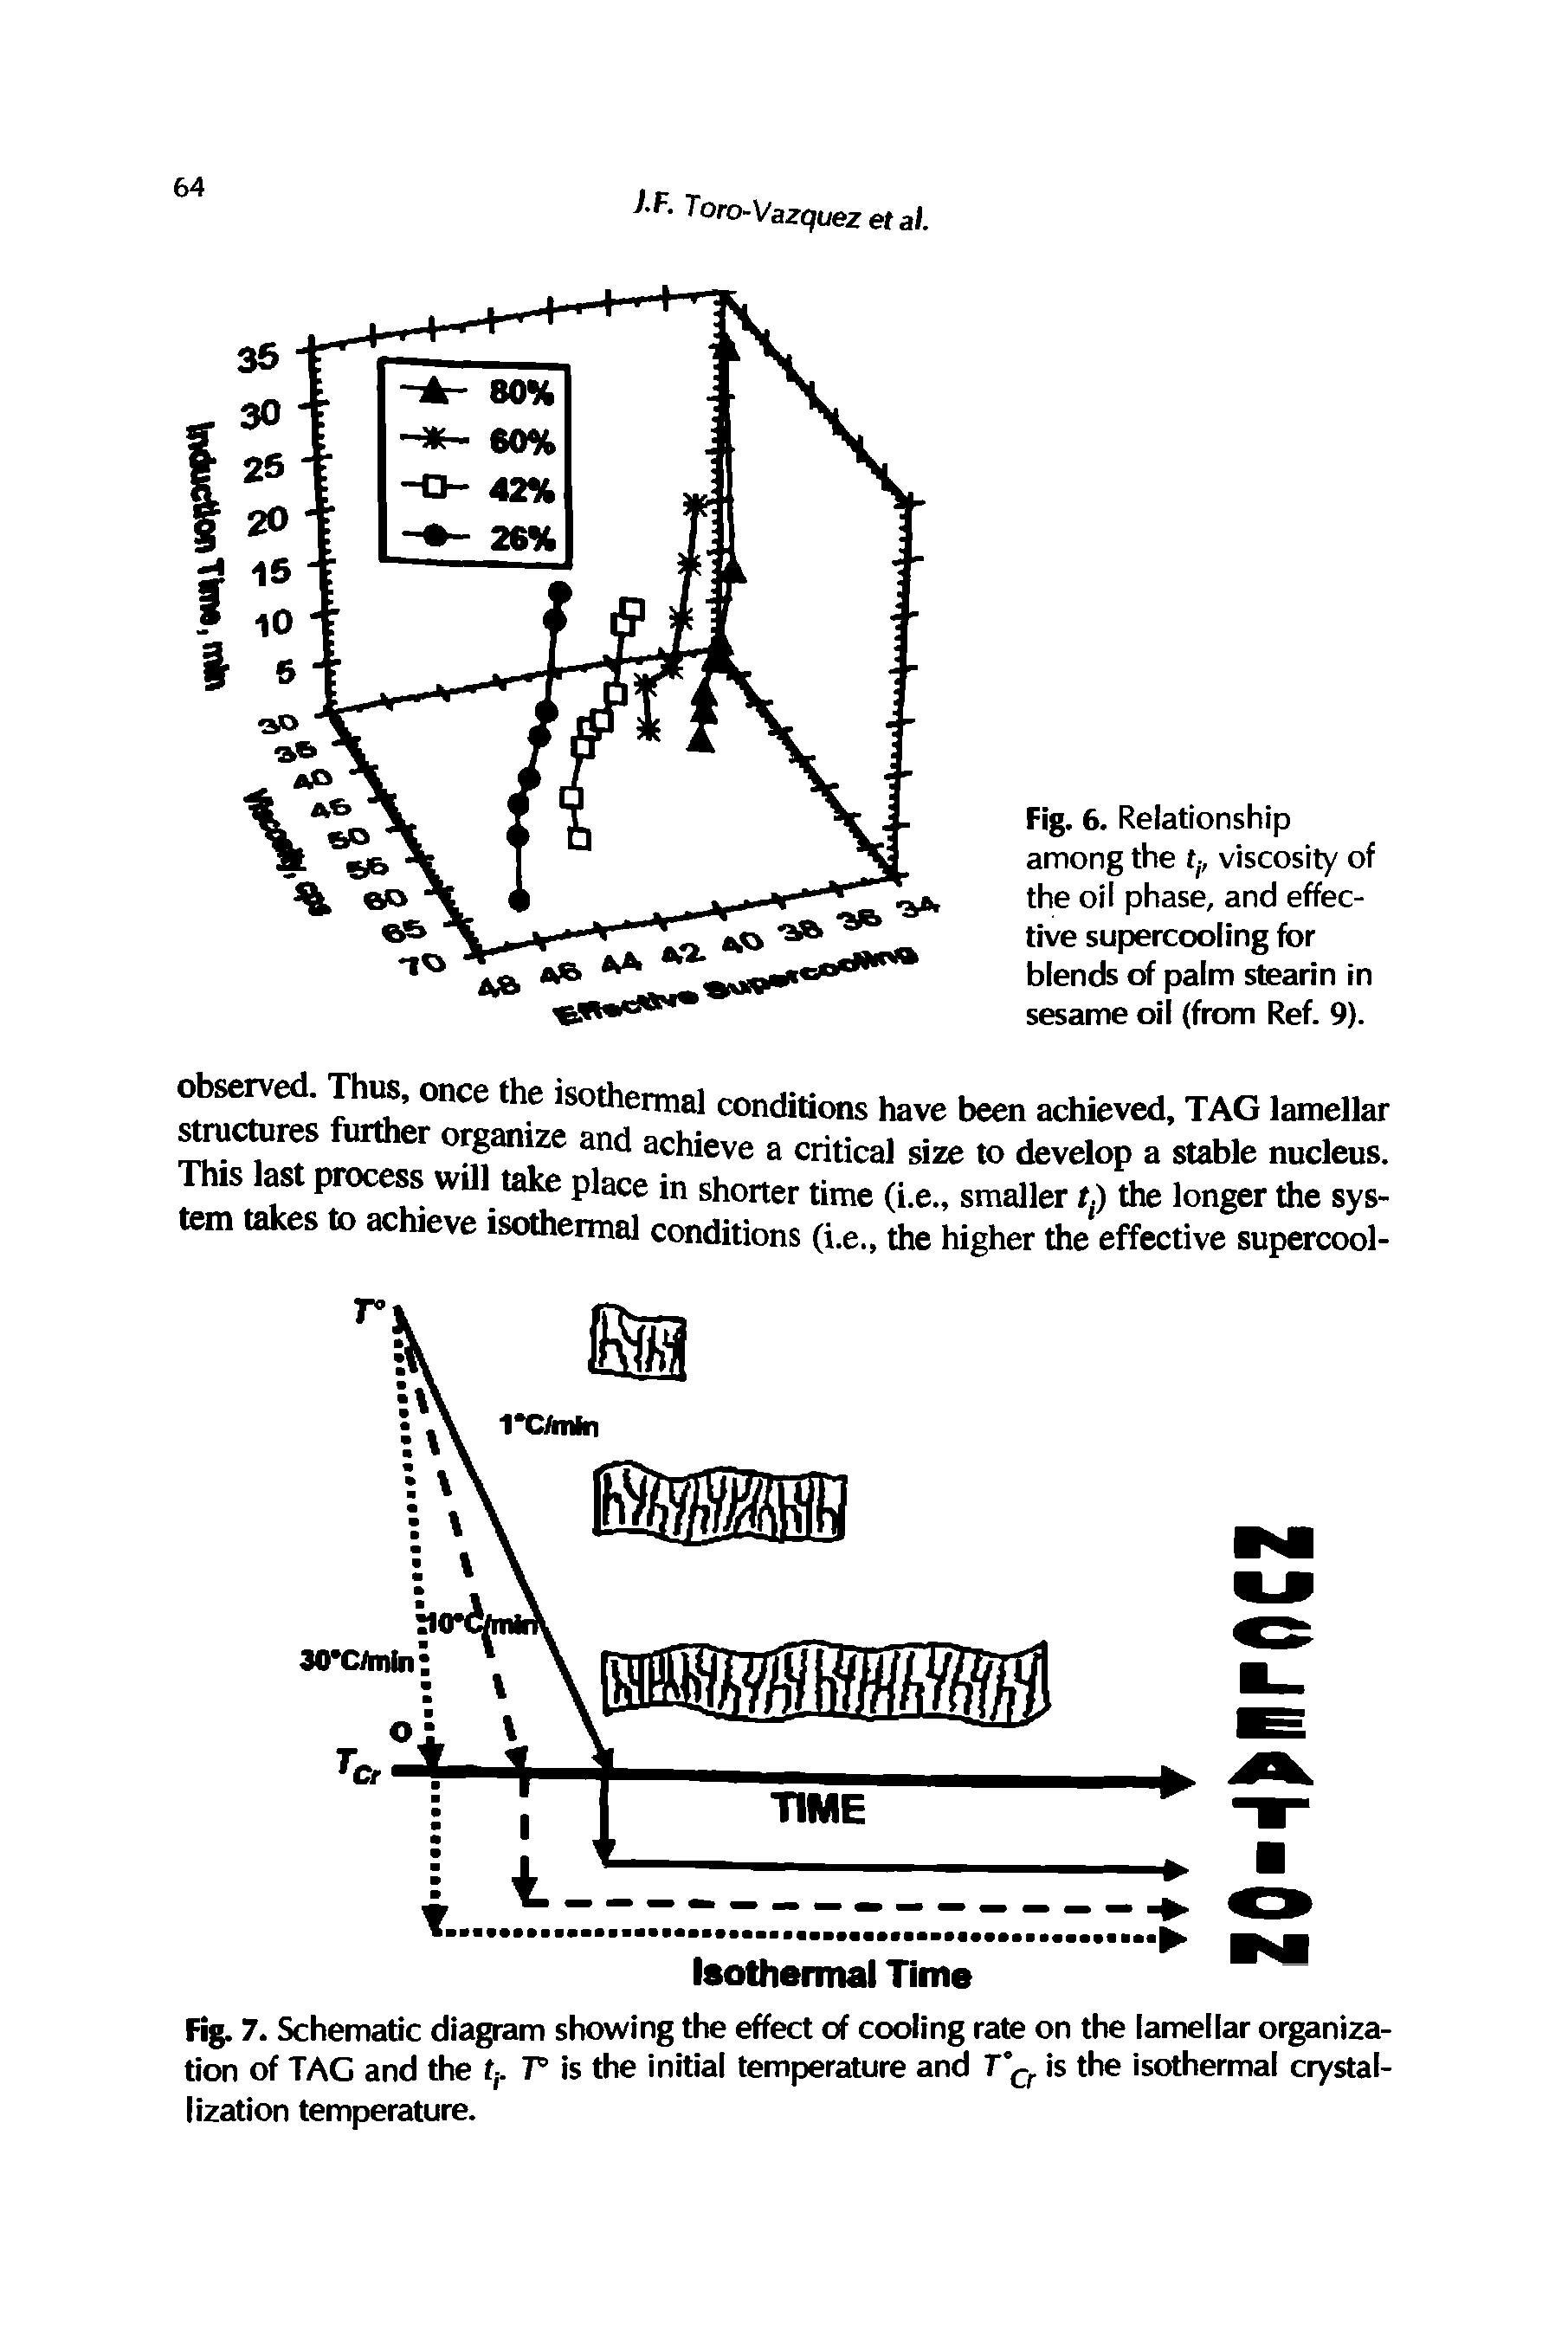 Fig. 7. Schematic diagram showing the effect of cooling rate on the lamellar organization of TAG and the t,. T is the initial temperature and is the isothermal crystallization temperature.